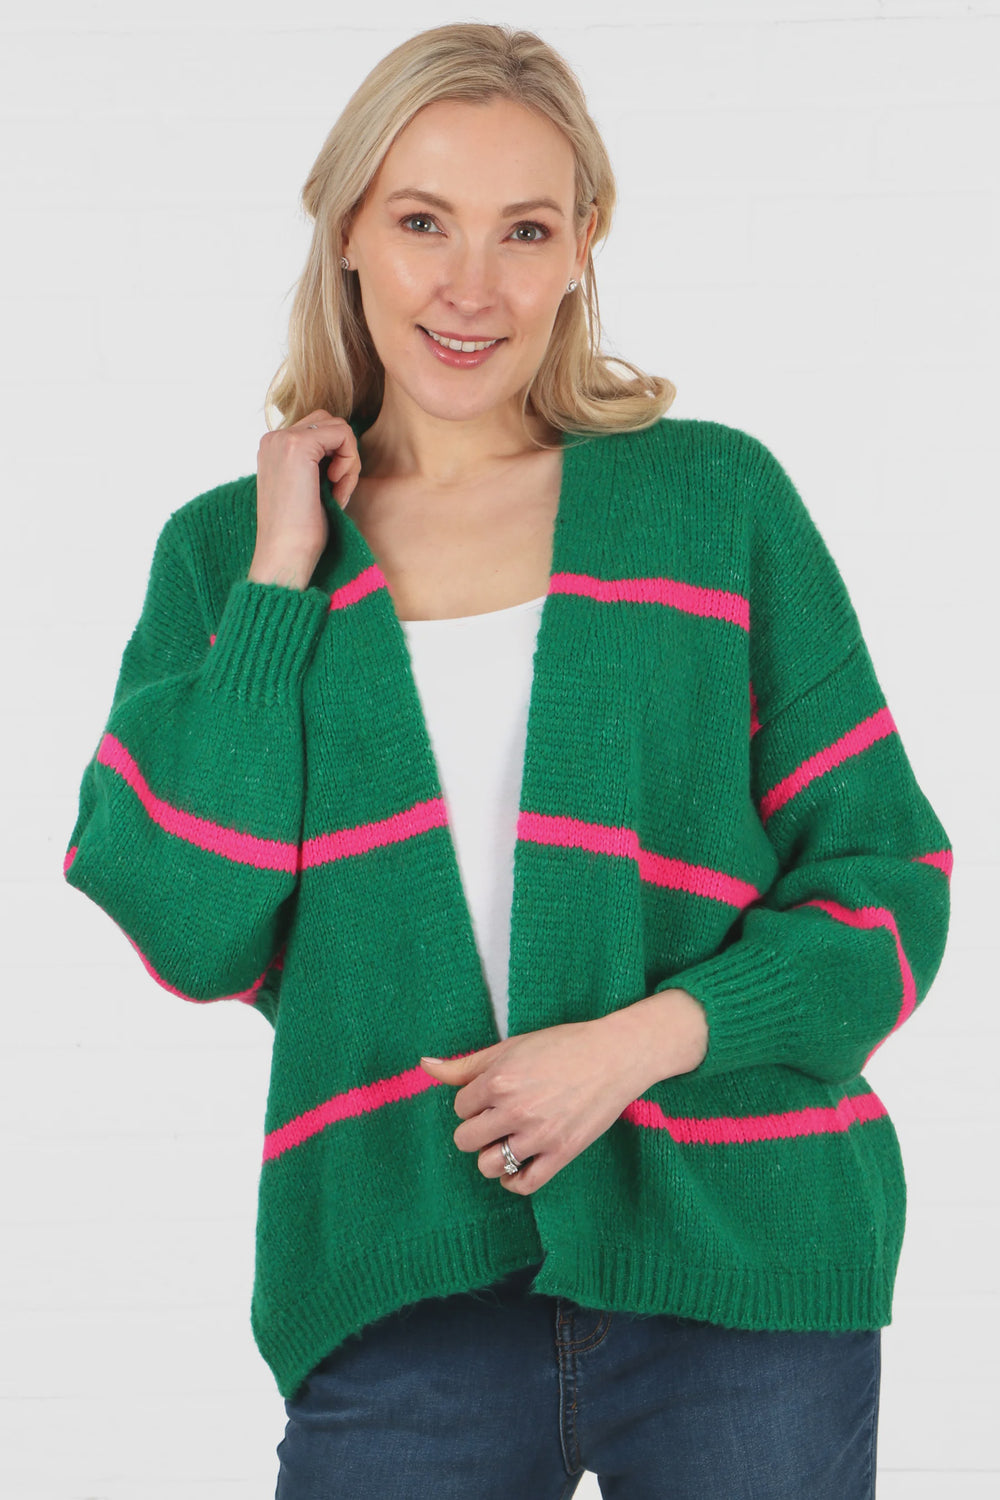 Green Cardigan With Pink Stripe